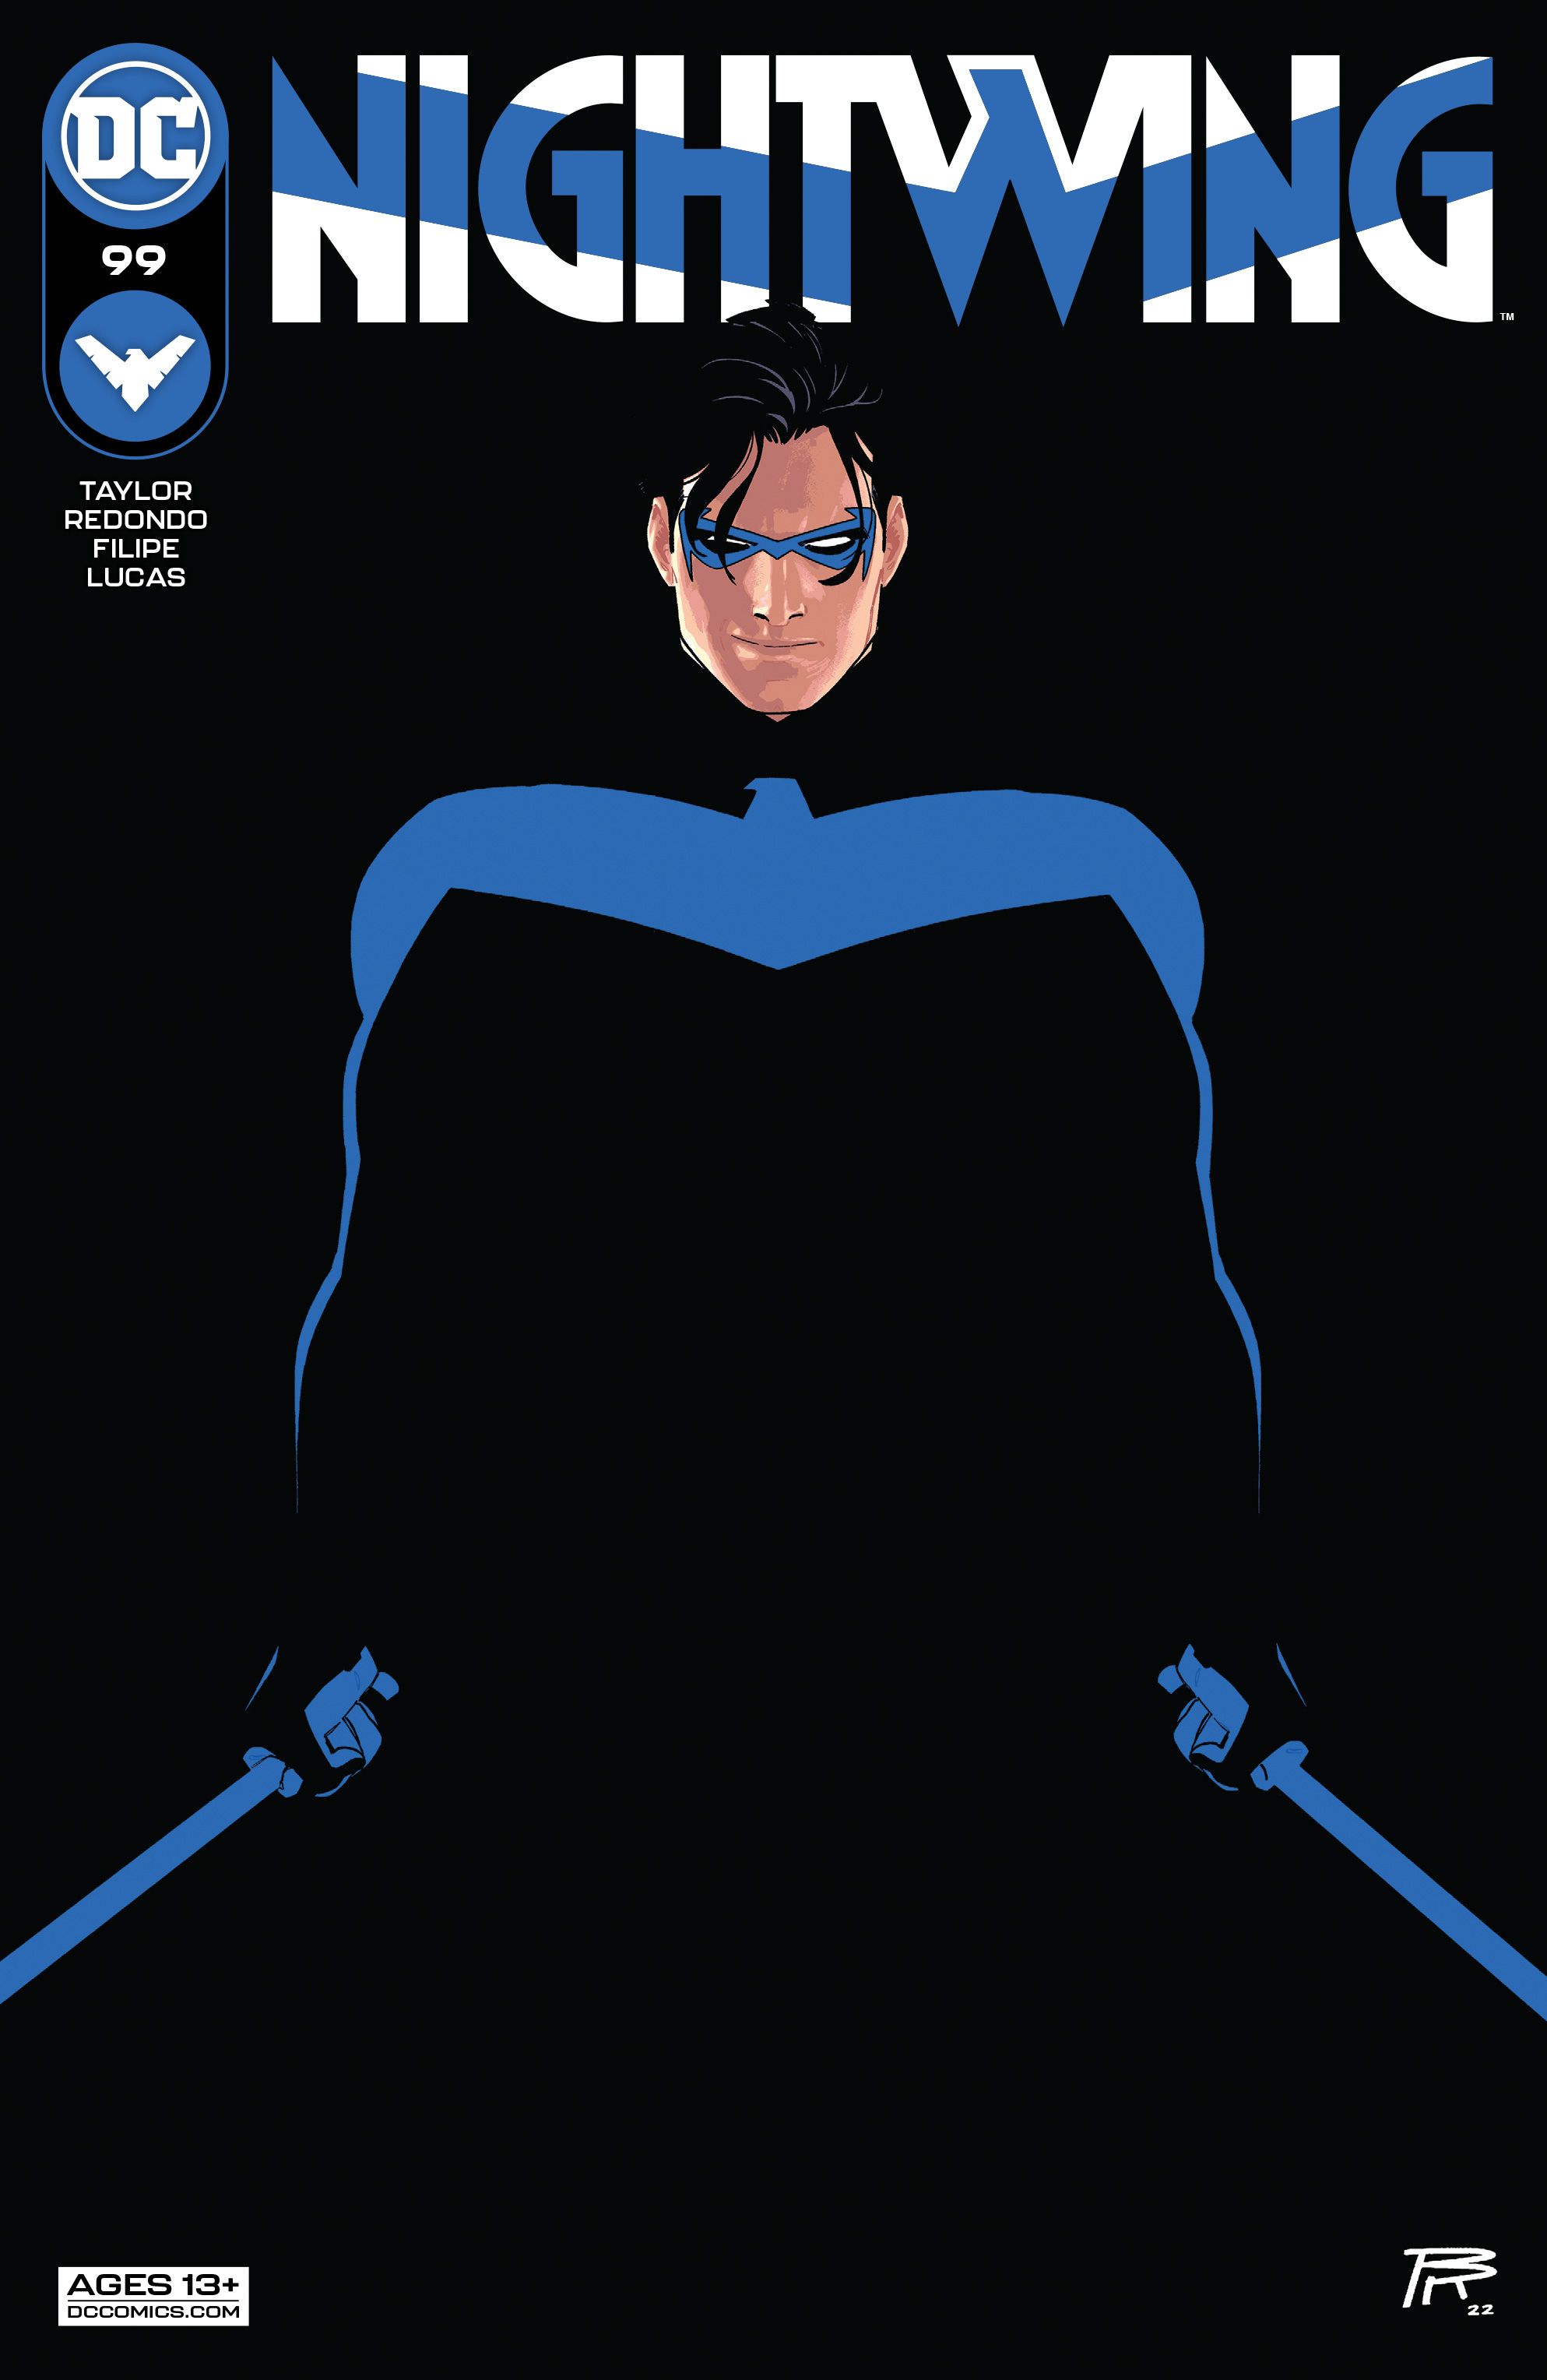 Nightwing #99 Cover